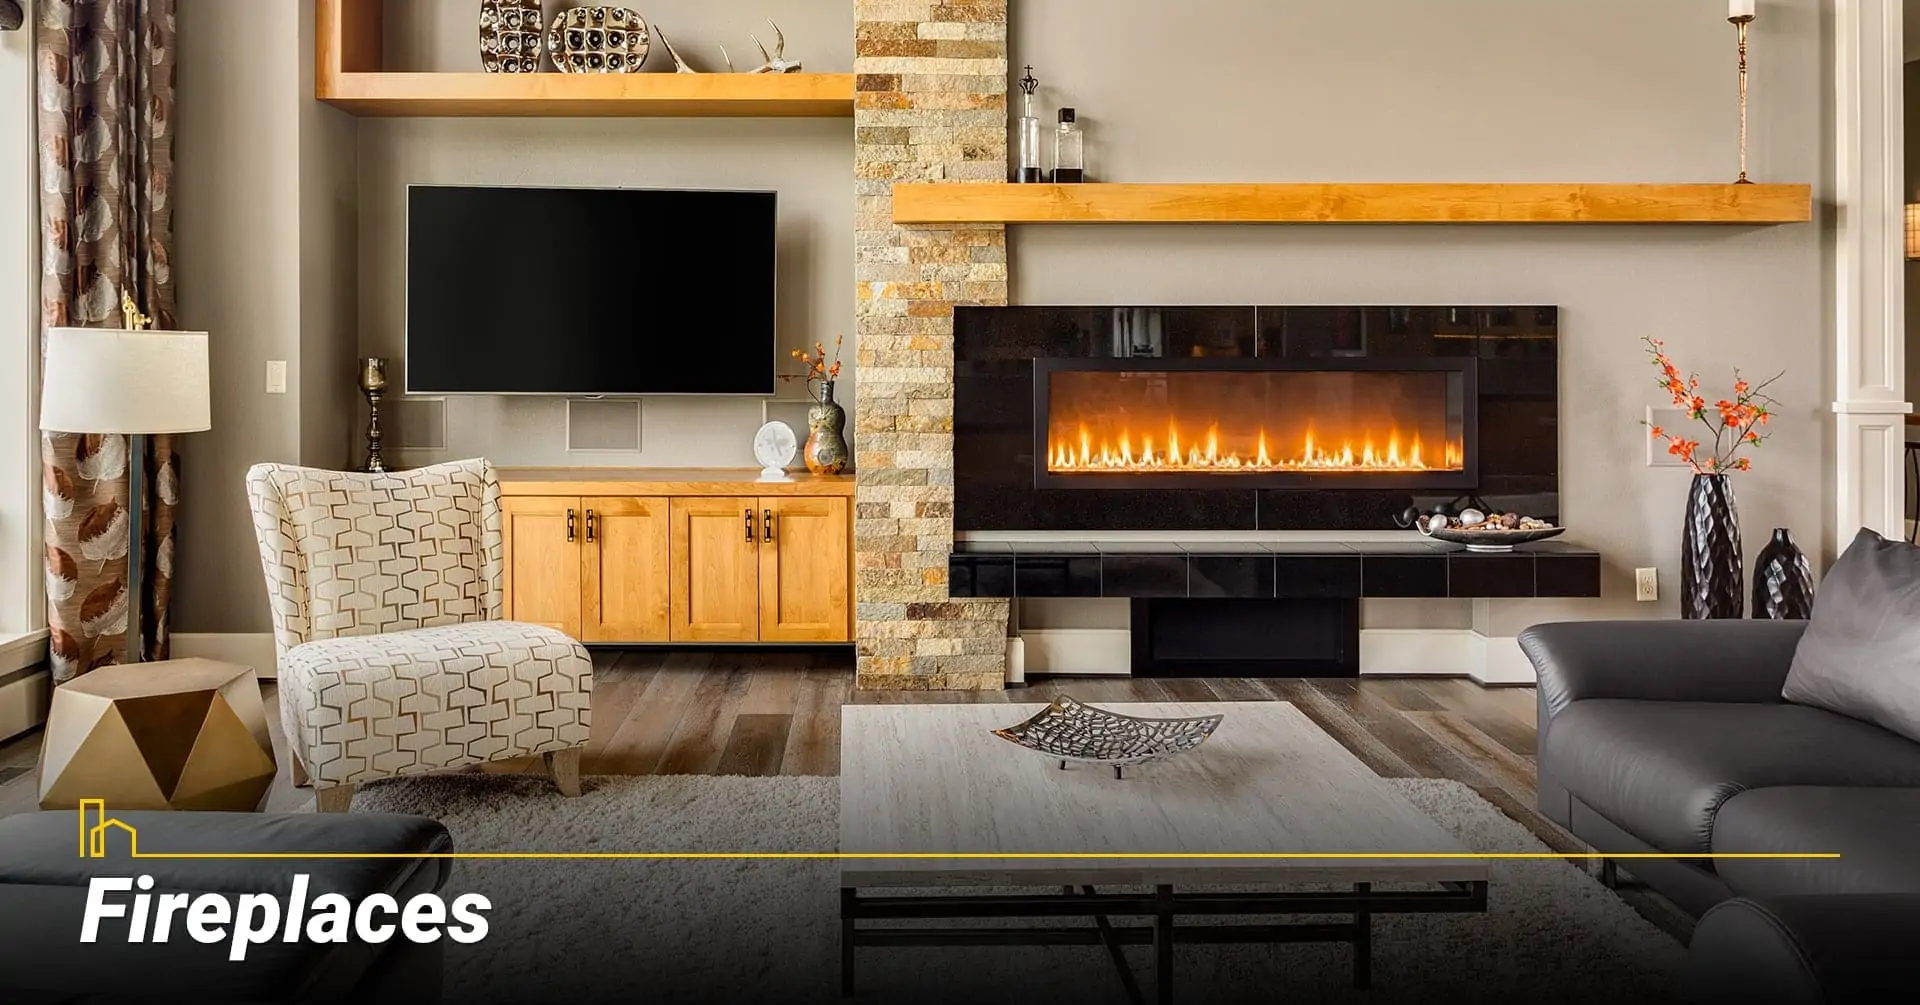 Fireplaces, heat your home with a fireplace